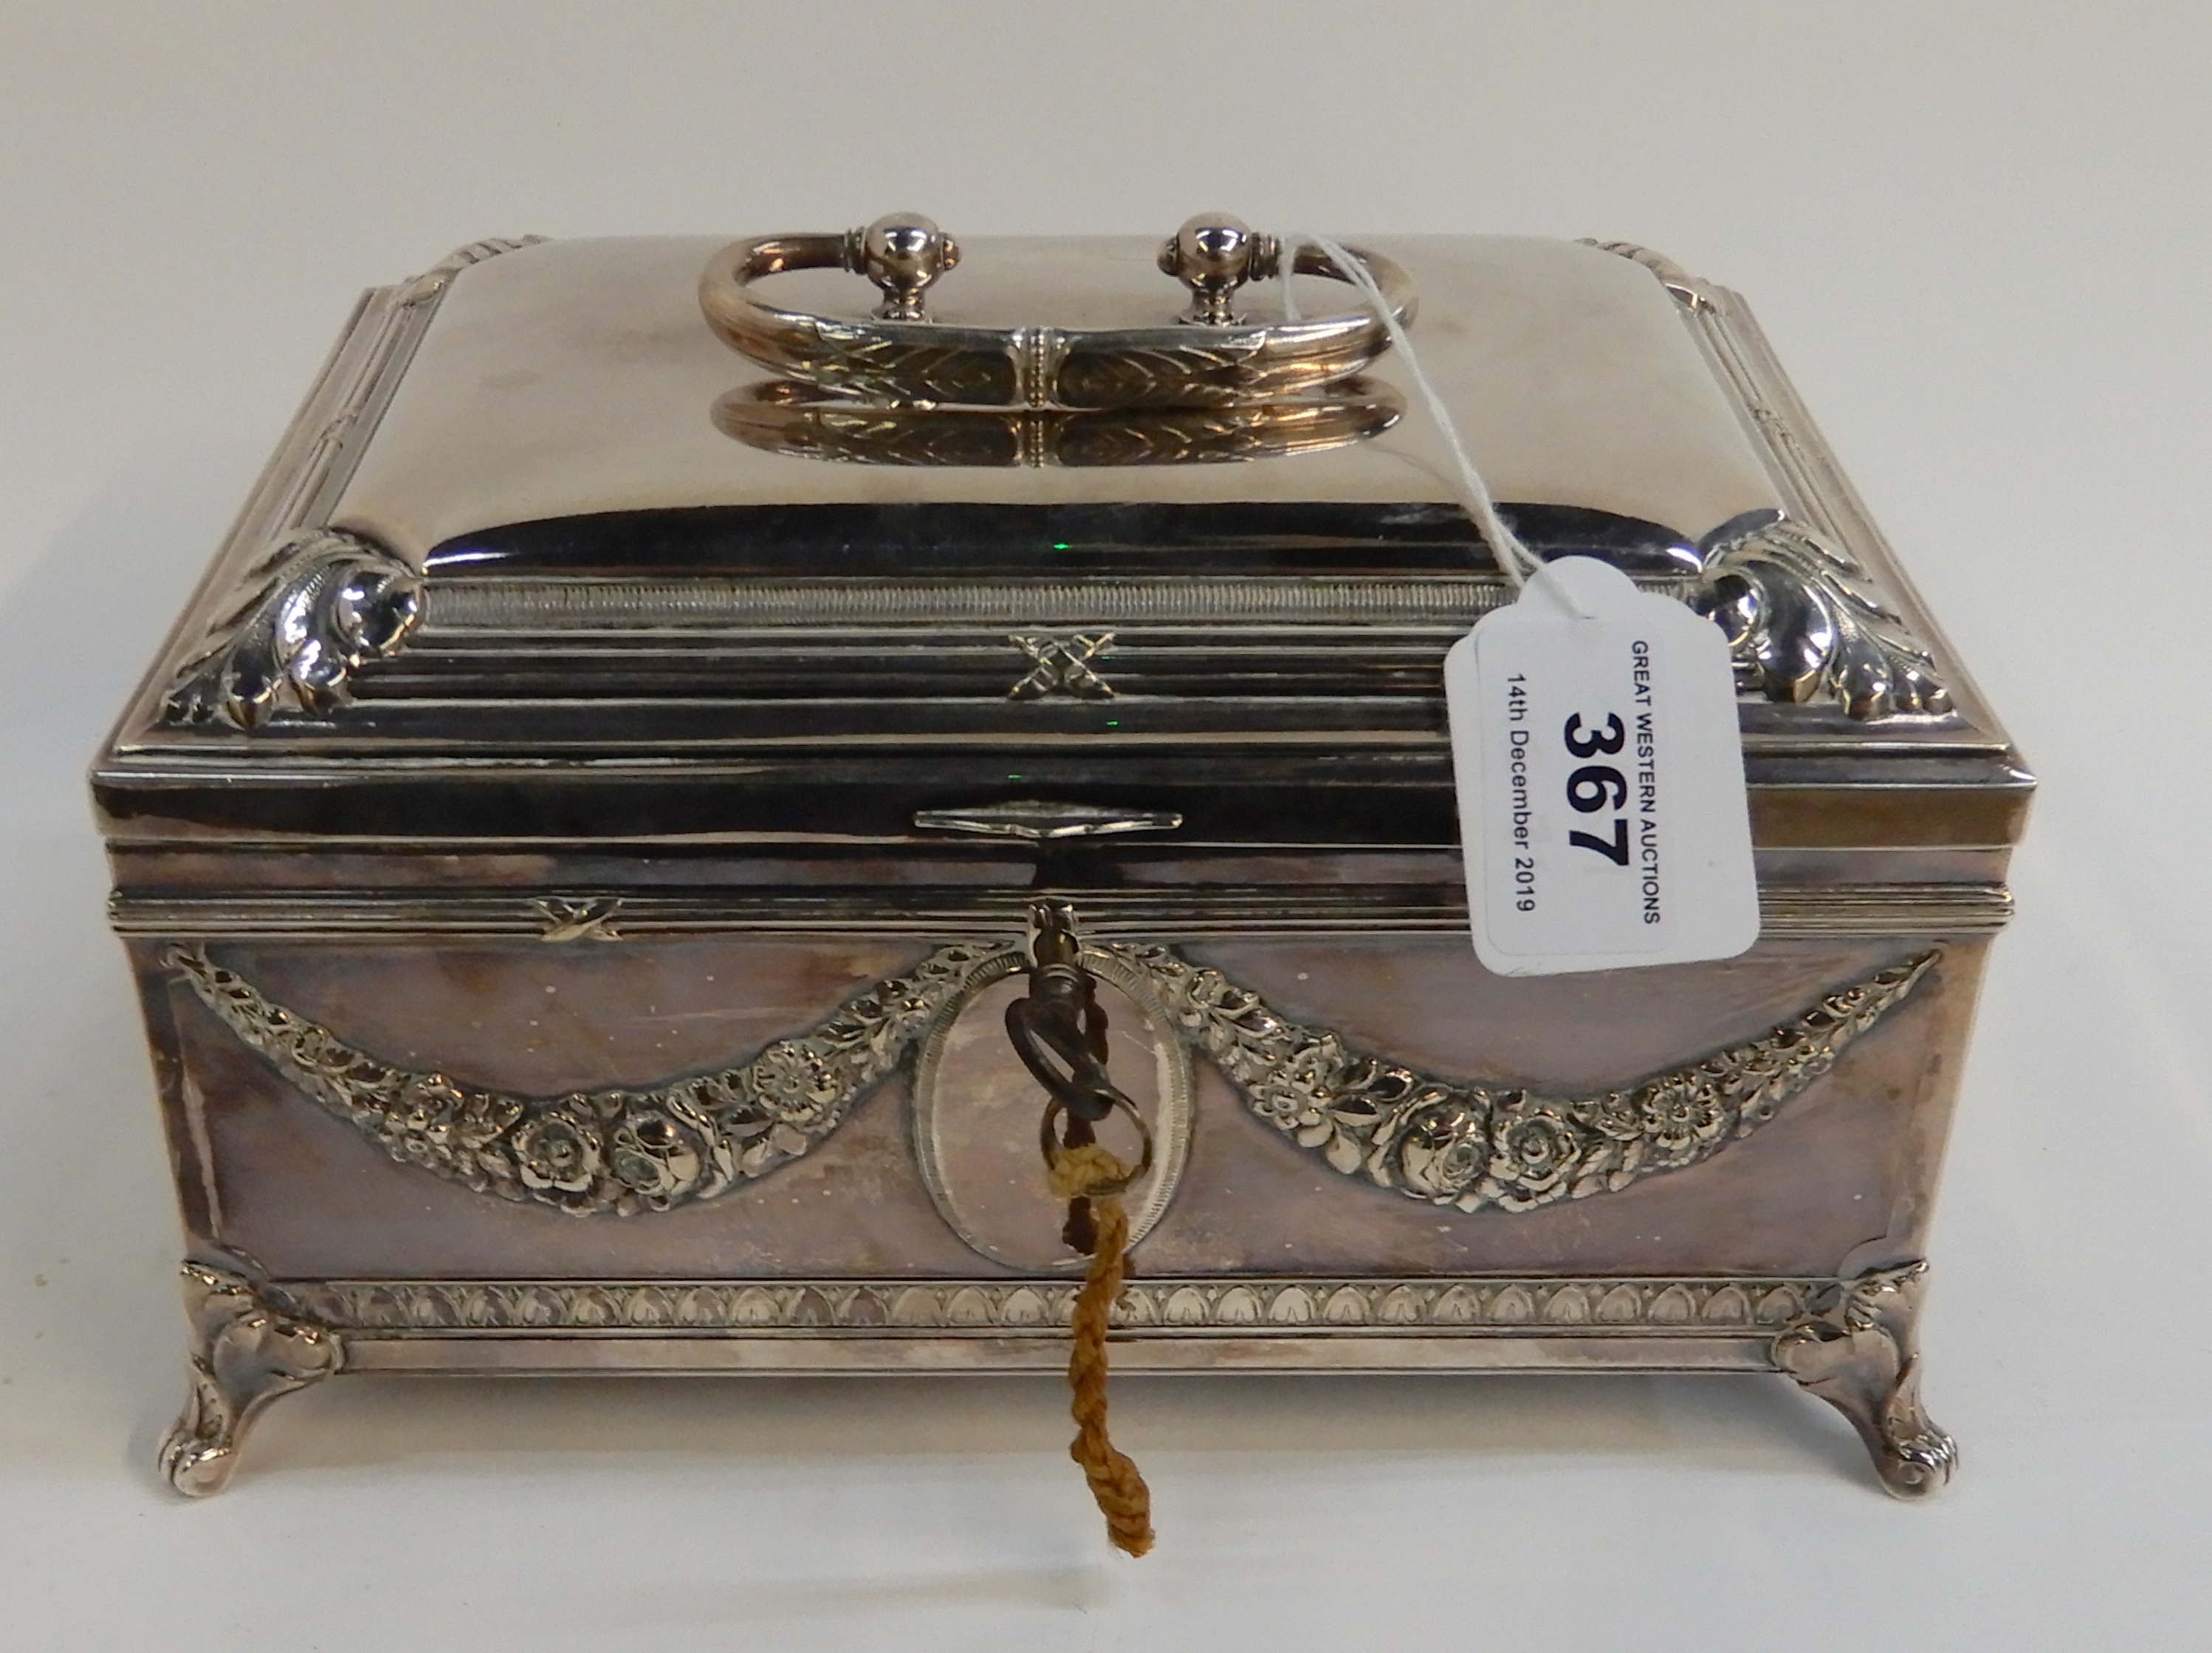 A silver plated casket decorated with floral swag decoration and fitted interior, 22cm x 16cm x 12cm